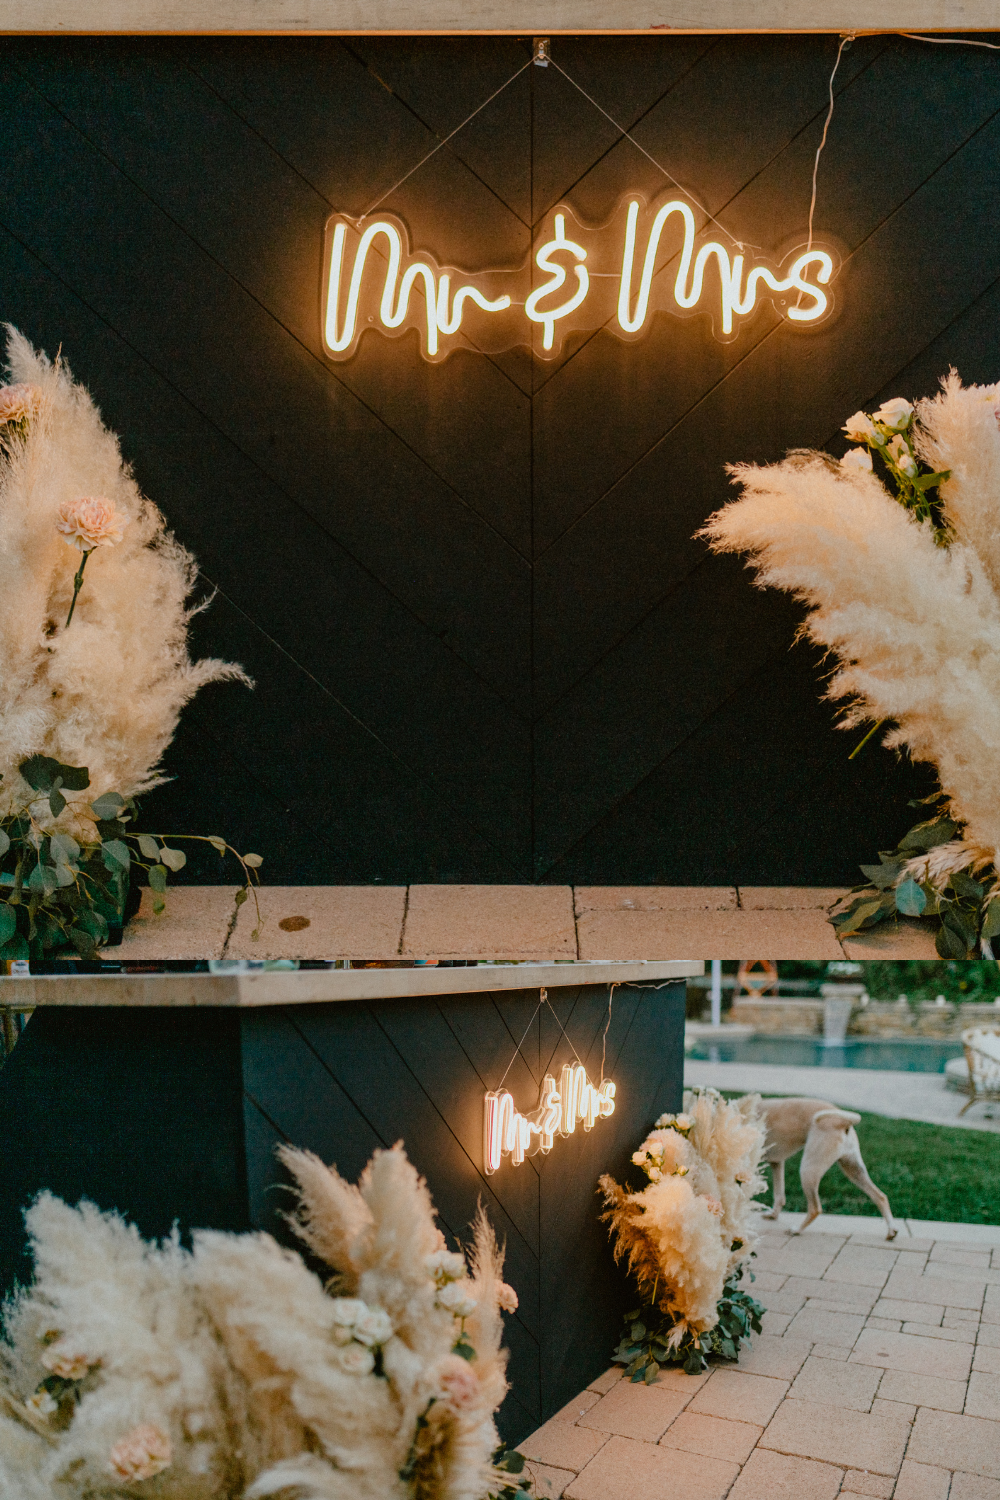 Wedding reception bar ideas with LED lights of Mr and Mrs, Wedding Reception ideas with pampas grass and floral accents | San Diego Wedding Photographer, San Diego California Elopement Photographer, Destination Wedding Photographer, Destination Elopement Photographer, Newlywed moments ideas, Newlywed Photography inspiration, California Elopement ideas, San Diego Wedding Inspiration, Romantic Boho Wedding Ideas, Romantic Elopement Inspiration, Bohemian Wedding Ideas | chelseaabril.com